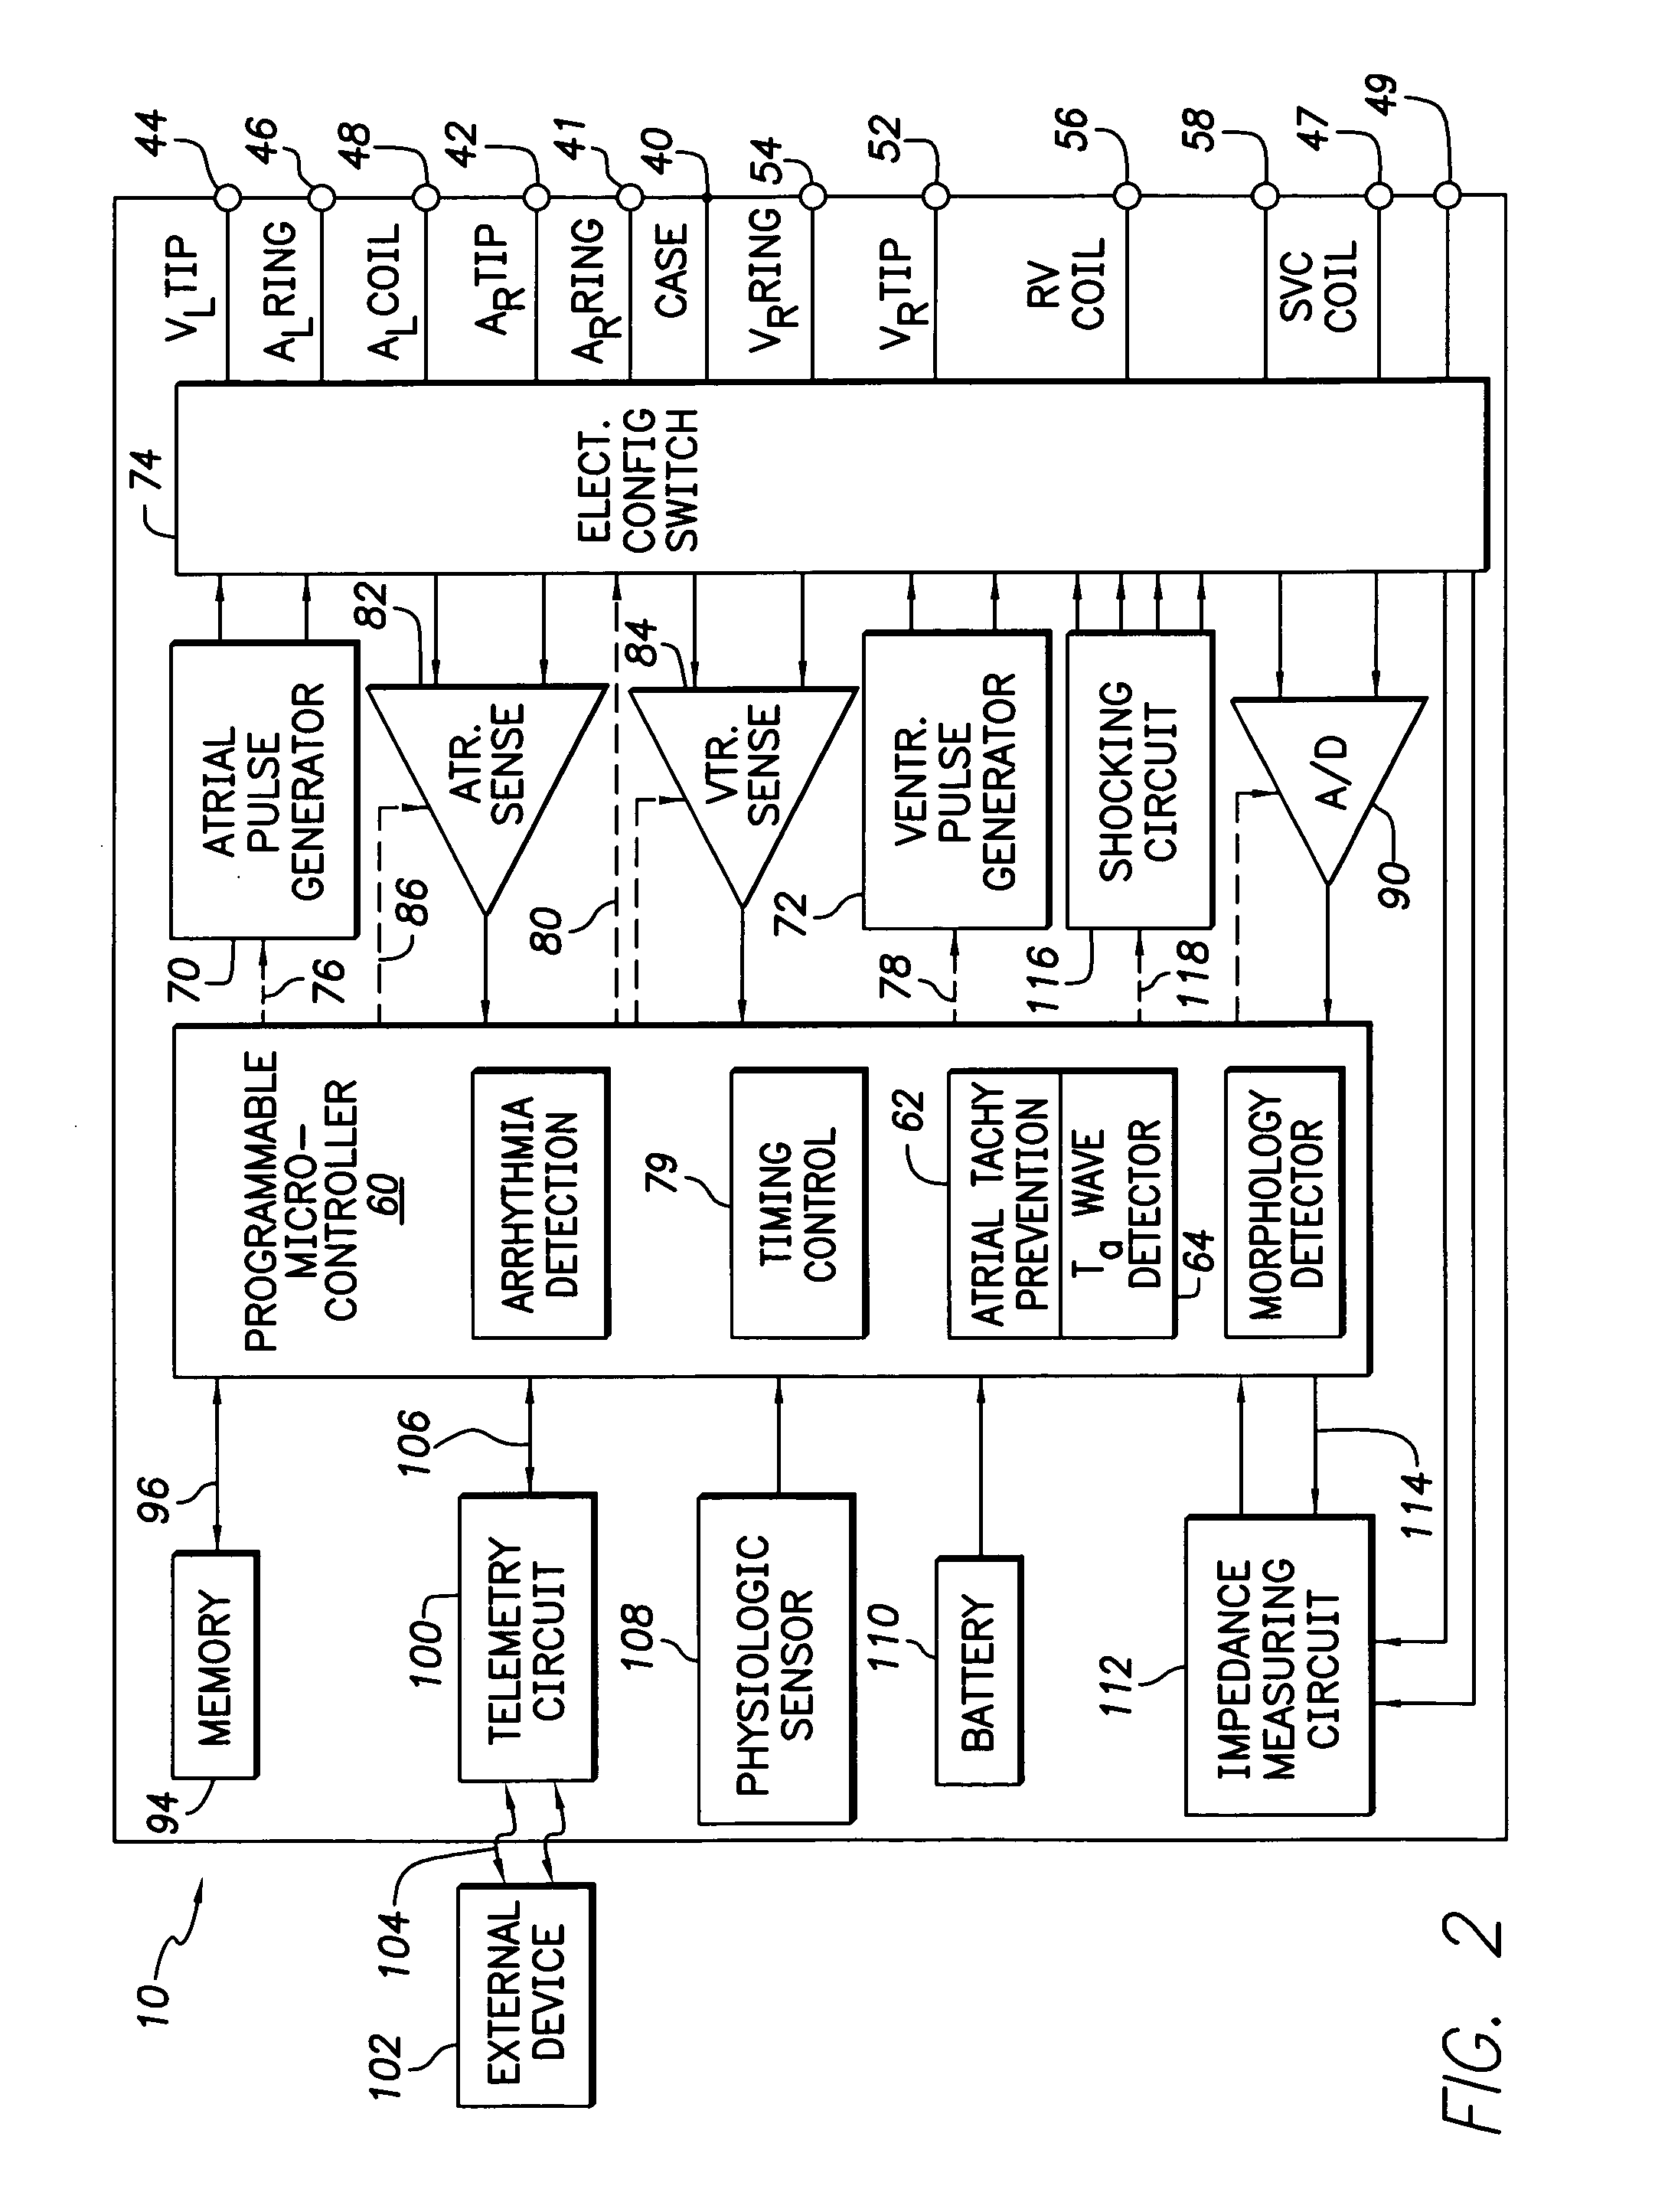 Implantable cardiac stimulation device, system and method that identifies and prevents impending arrhythmias of the atria